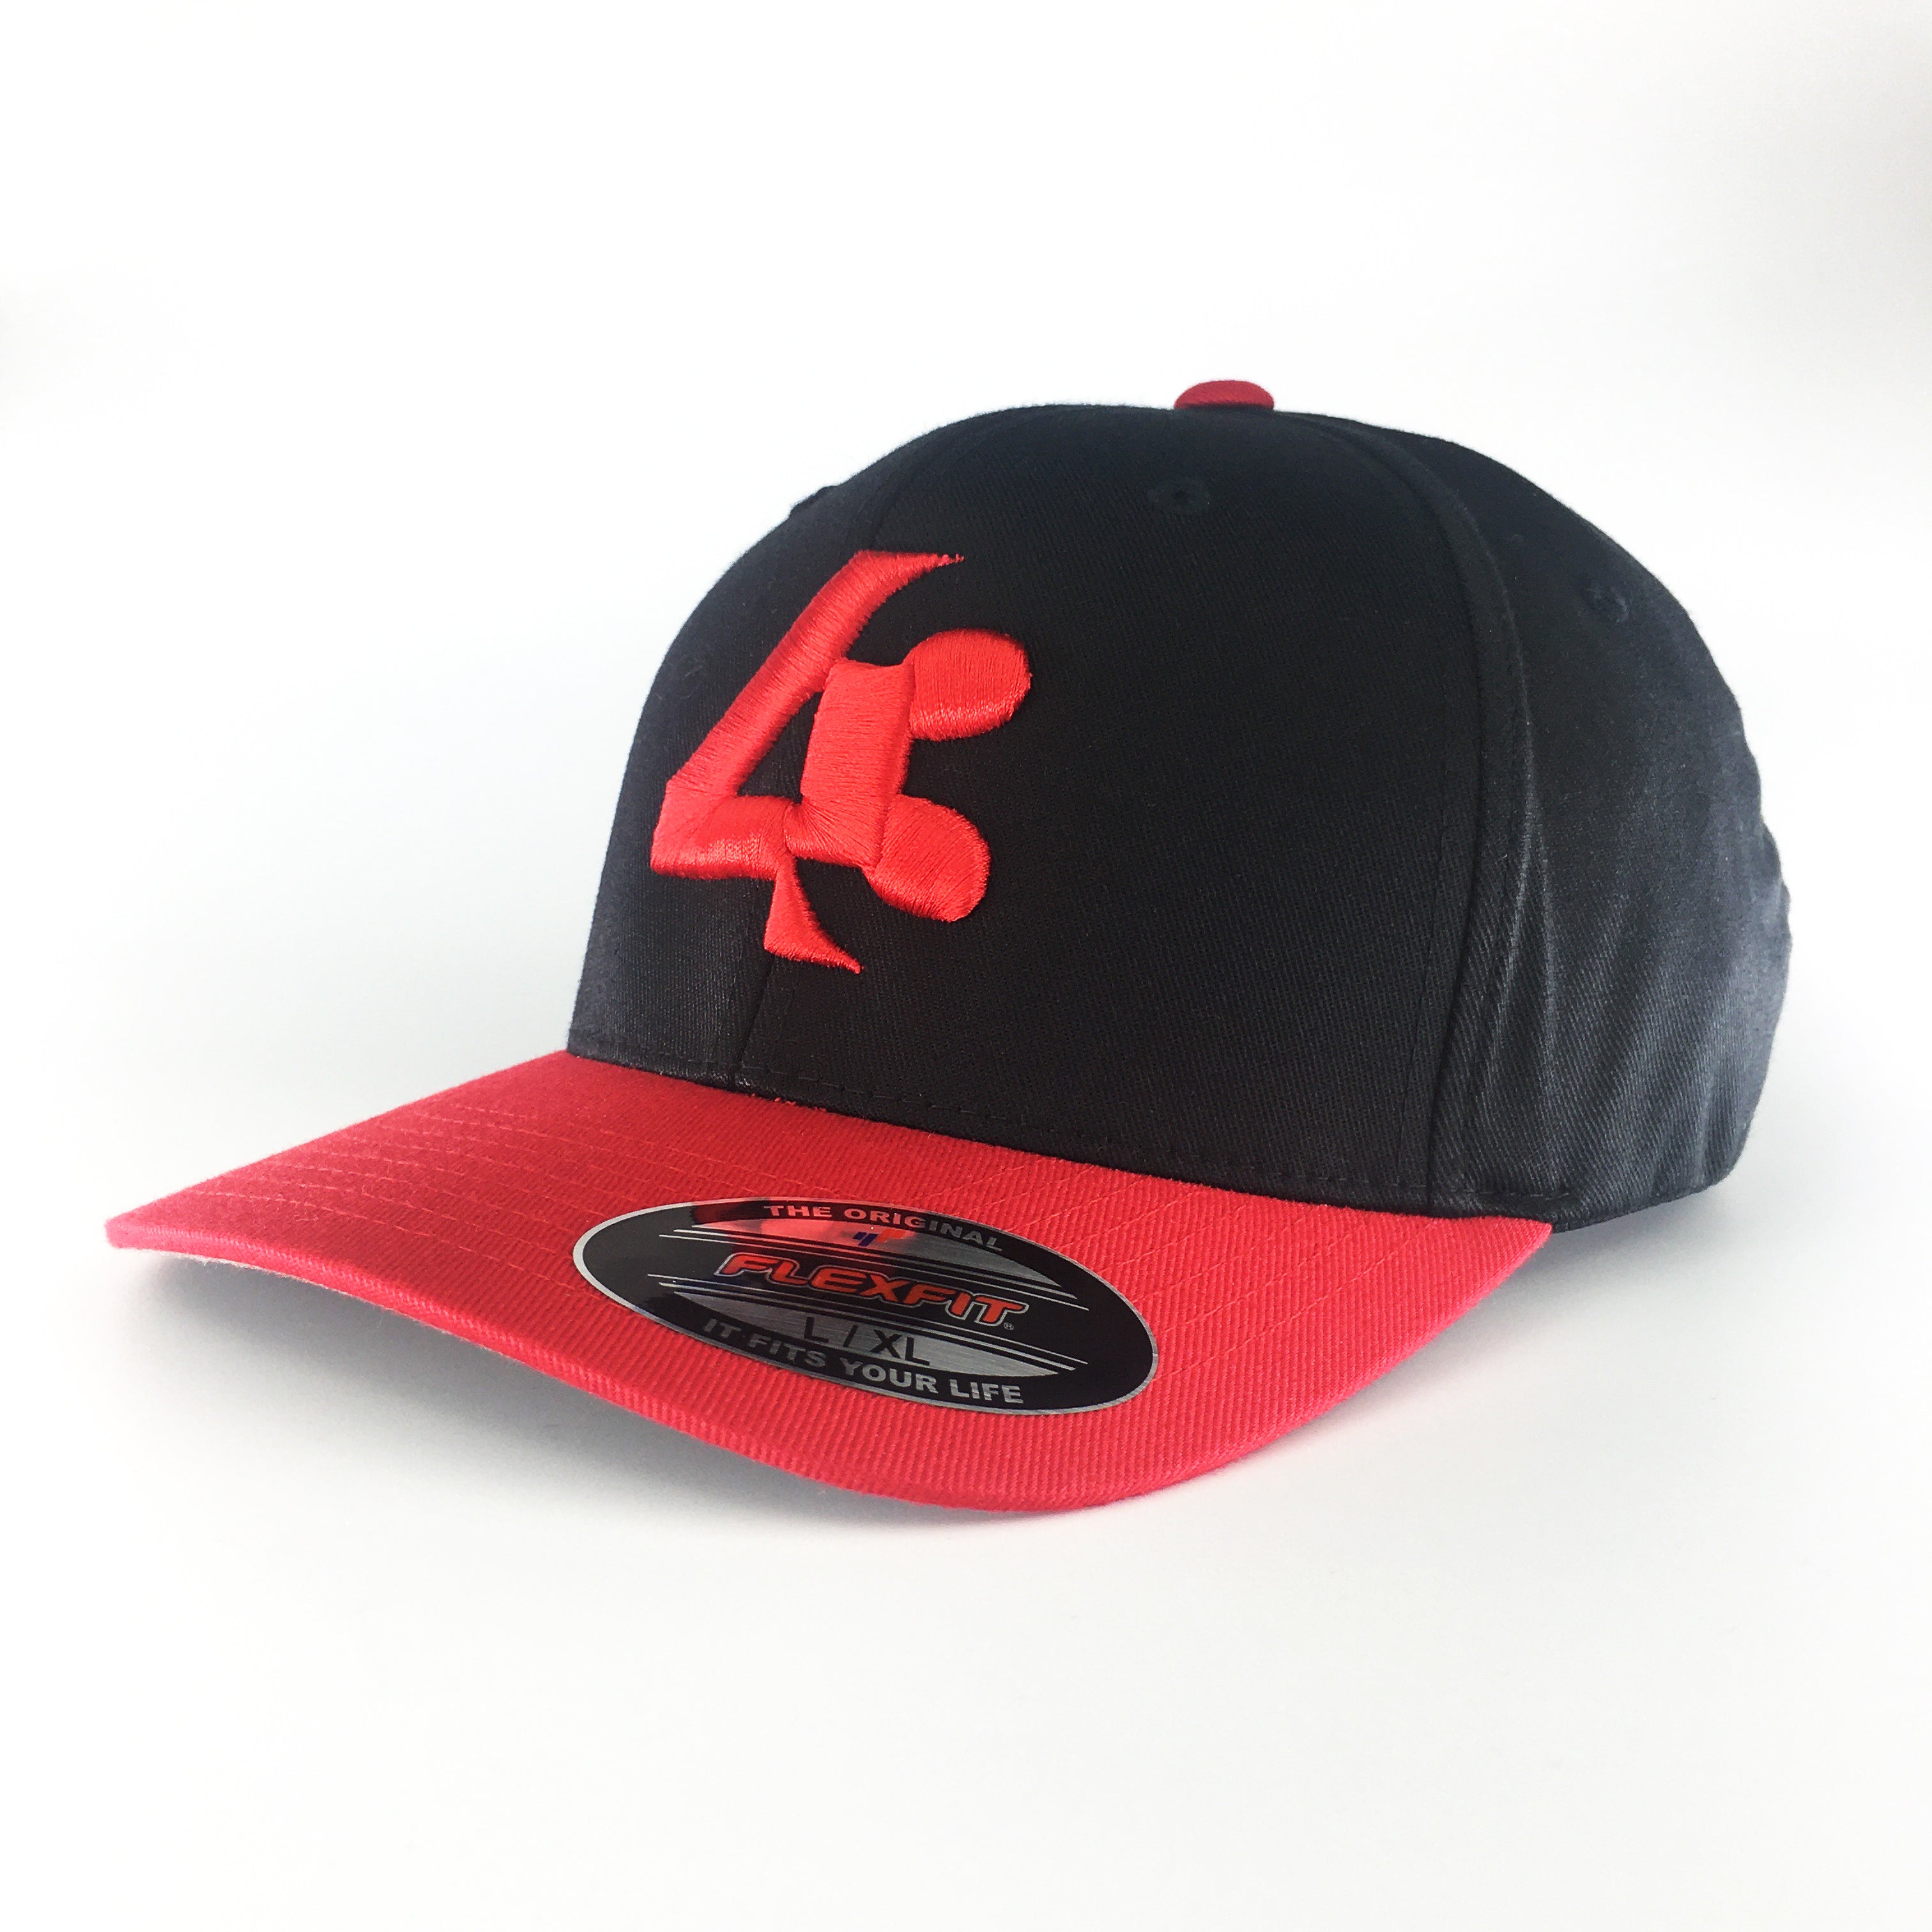 43 Red and Fitted Black Flexfit FortyThree™ – USA two toned